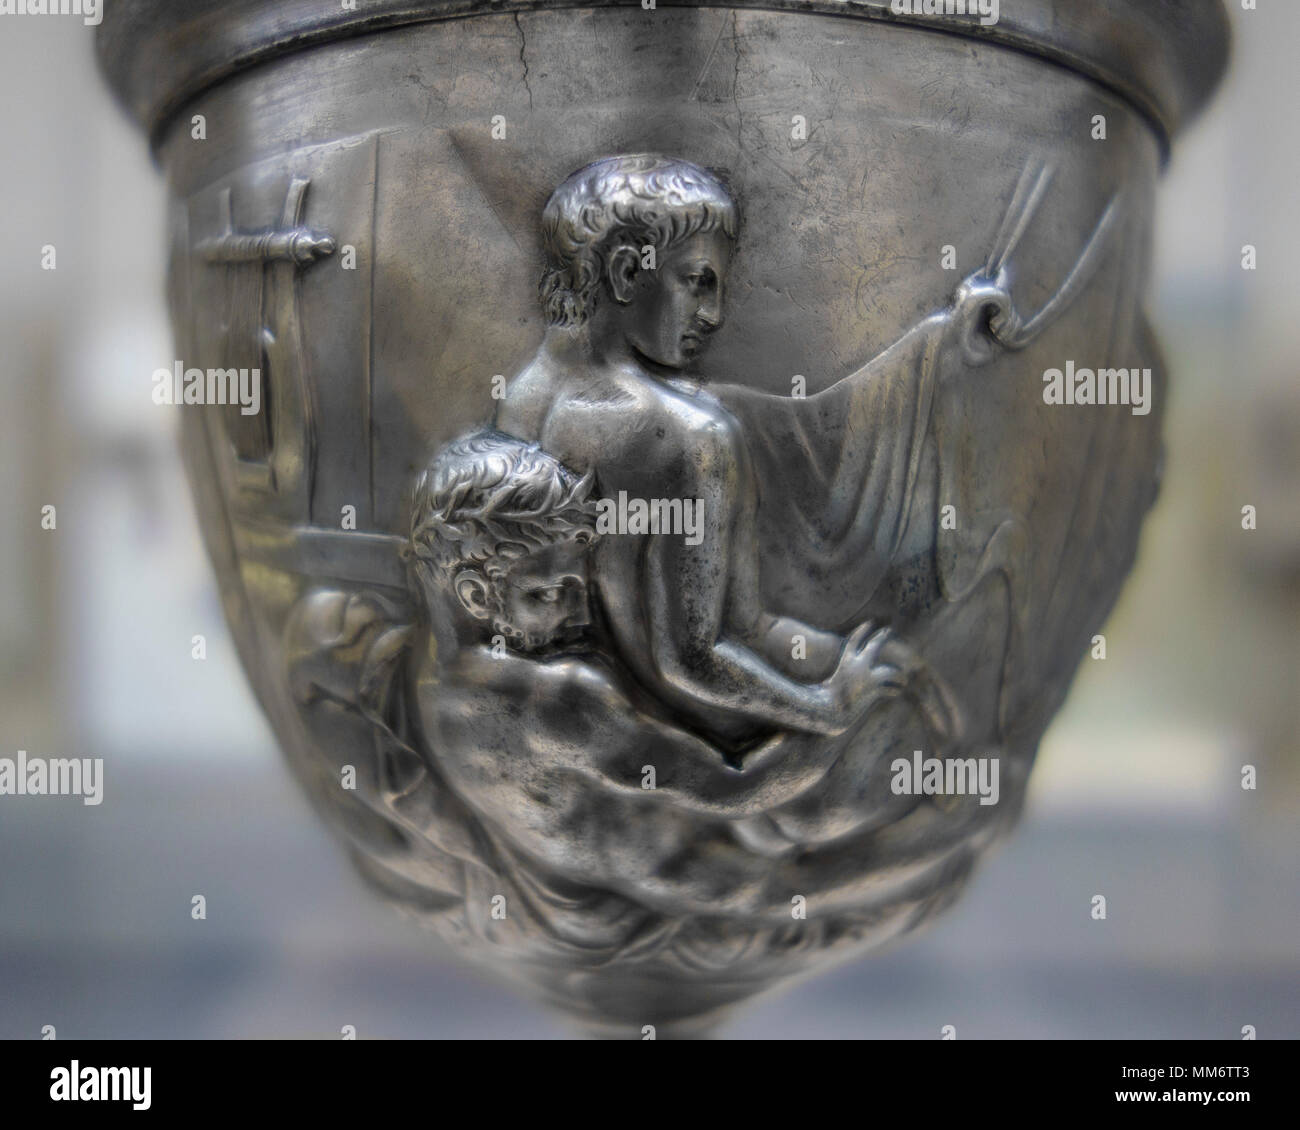 London. England. British Museum. The Warren Silver Cup, Roman drinking cup, decorated with reliefs of male same-sex acts, made about 15 BC-15 AD, said Stock Photo